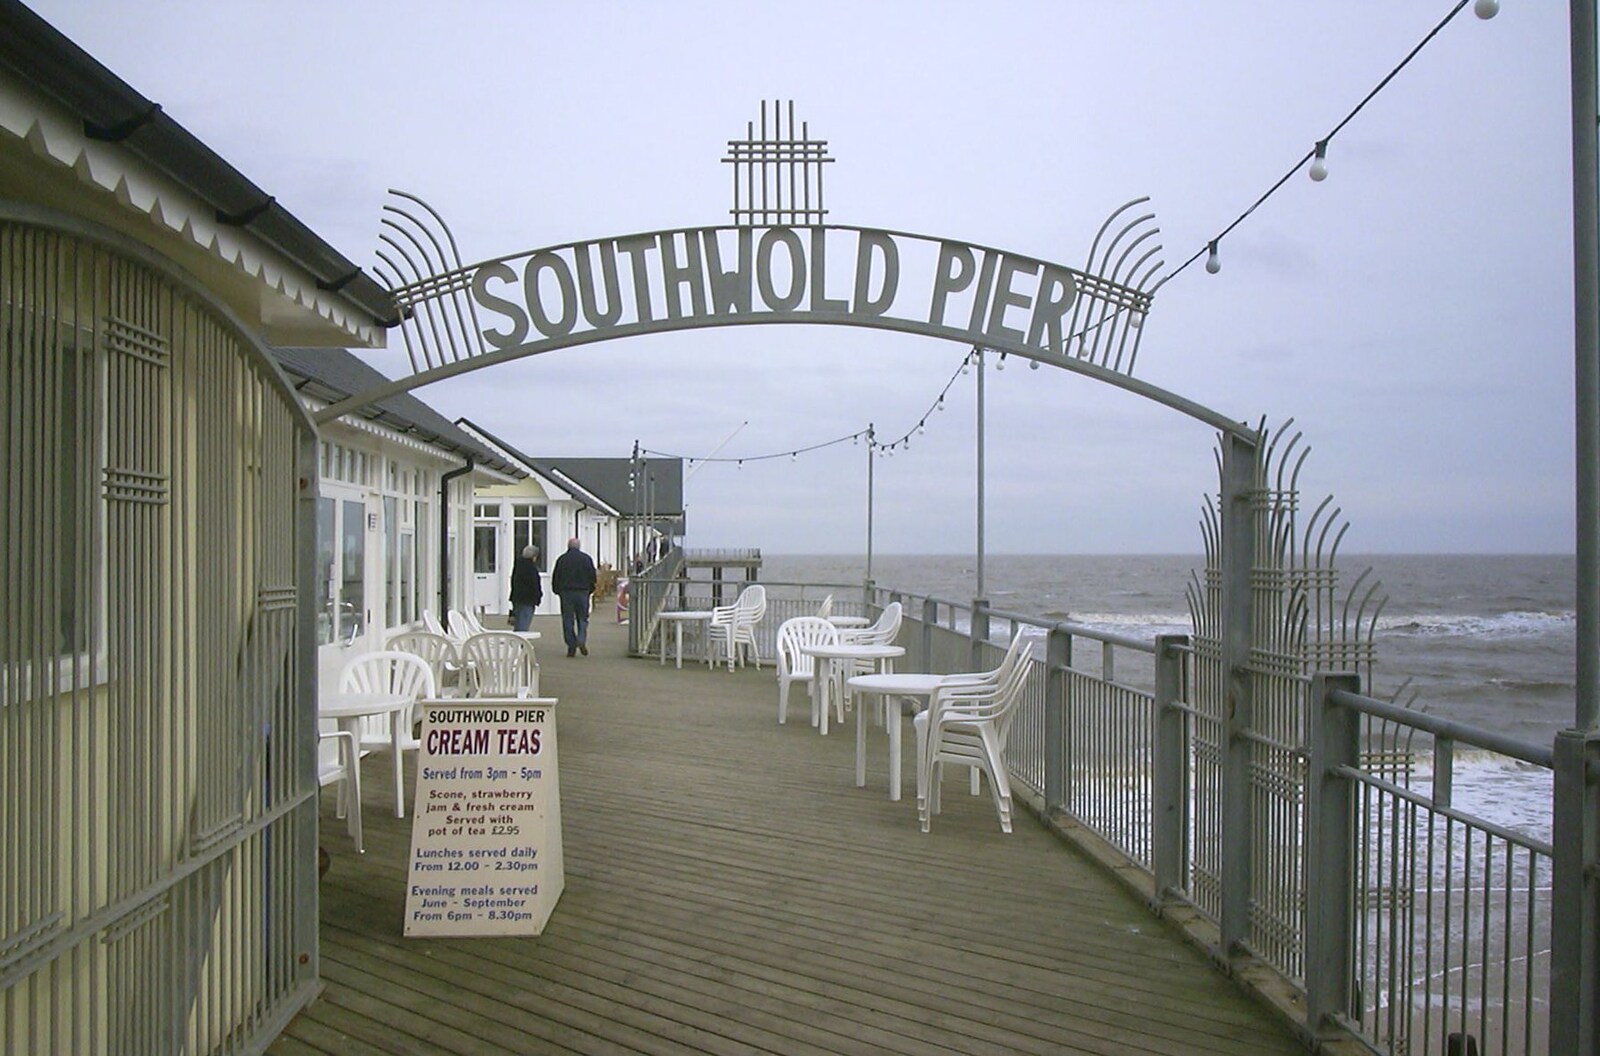 The Southwold Pier sign from Moping in Southwold, Suffolk - 3rd April 2004